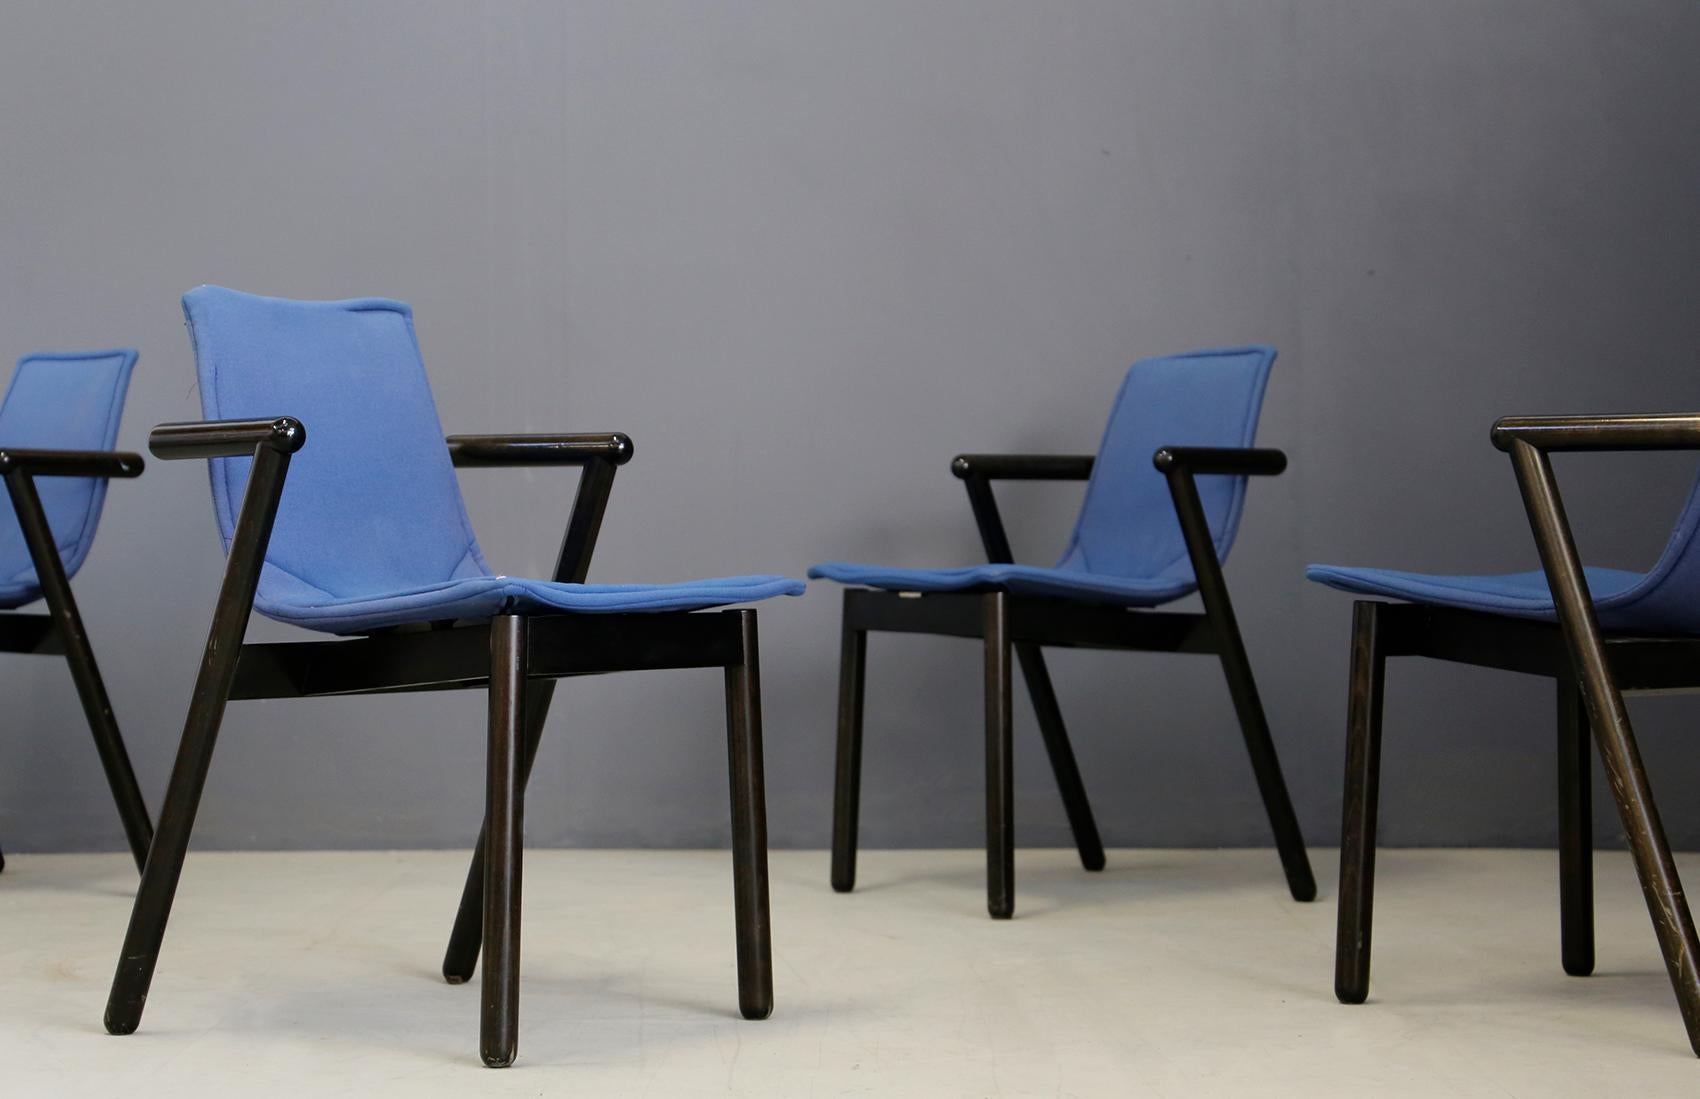 Set of 4 chairs Cassina manufacture. Black lacquered tubular wood structure. Its cover for seat and backrest is in blue fabric with zipper cover. Each chair has the original label under the seat. The chairs have a very geometric design in fact they